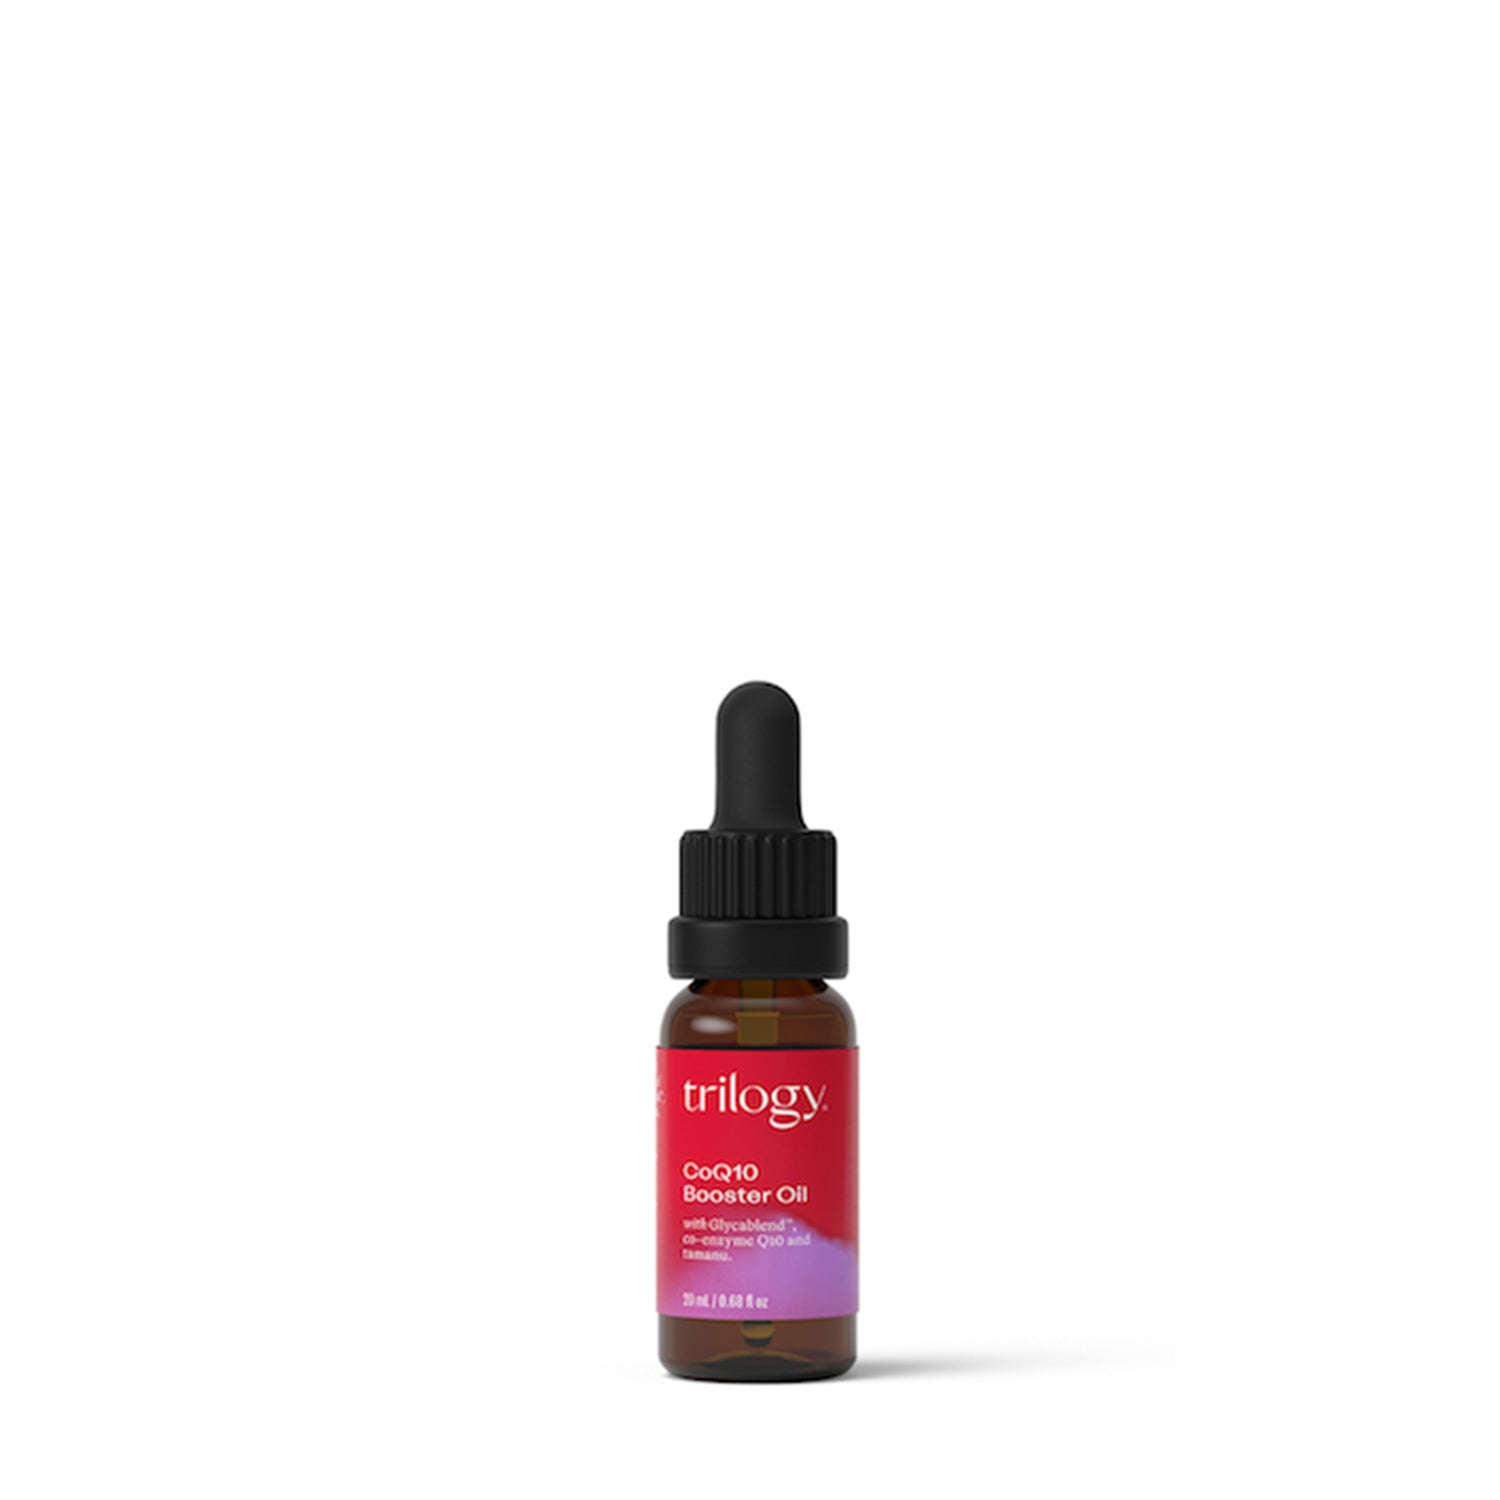 Age-Proof CoQ10 Booster Oil